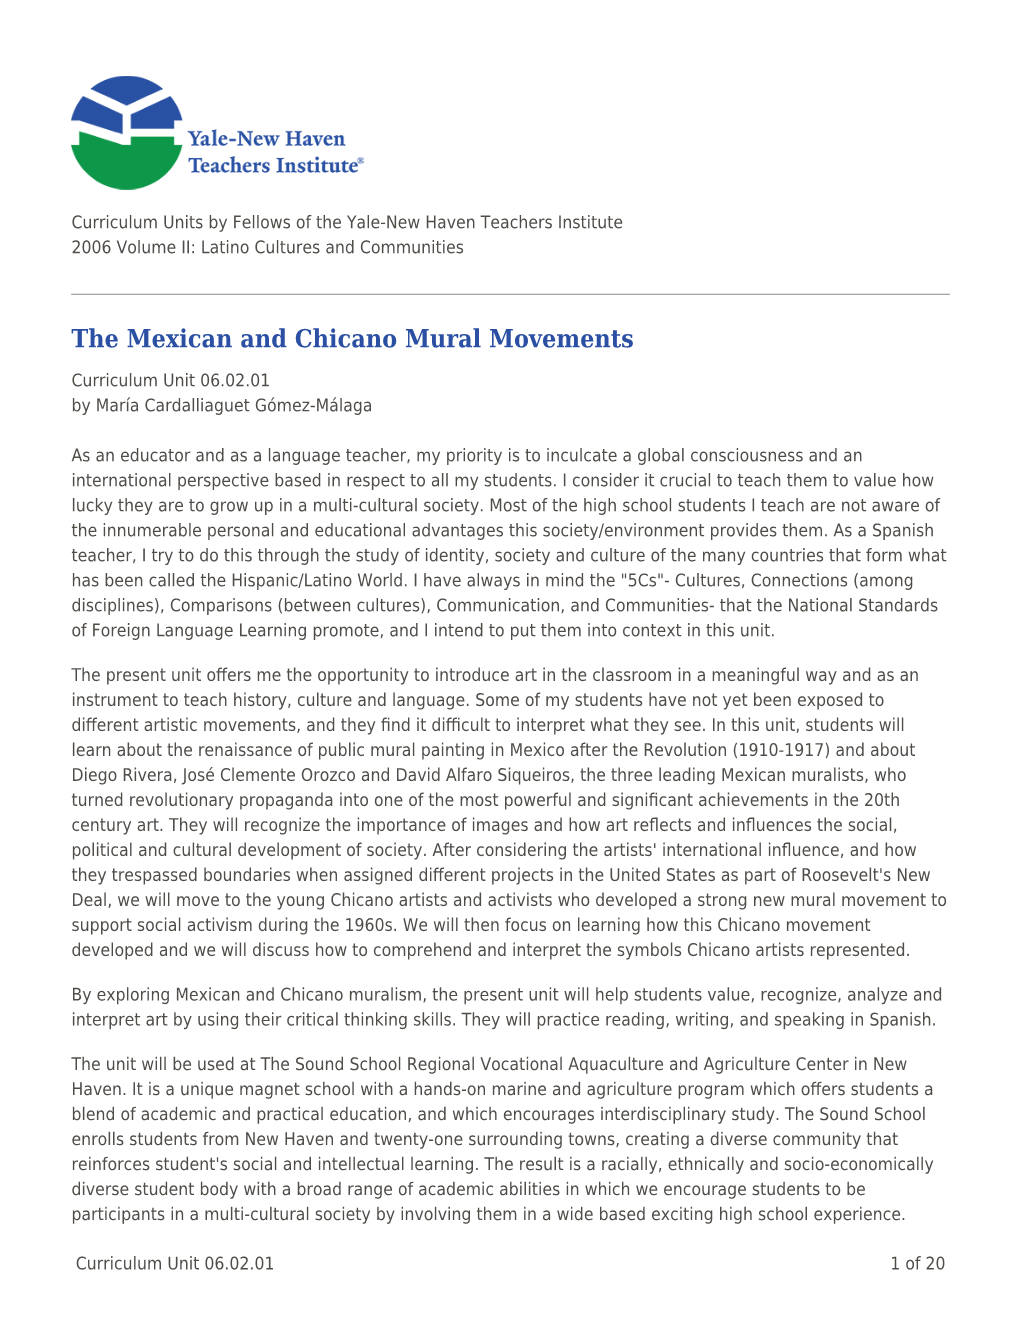 The Mexican and Chicano Mural Movements